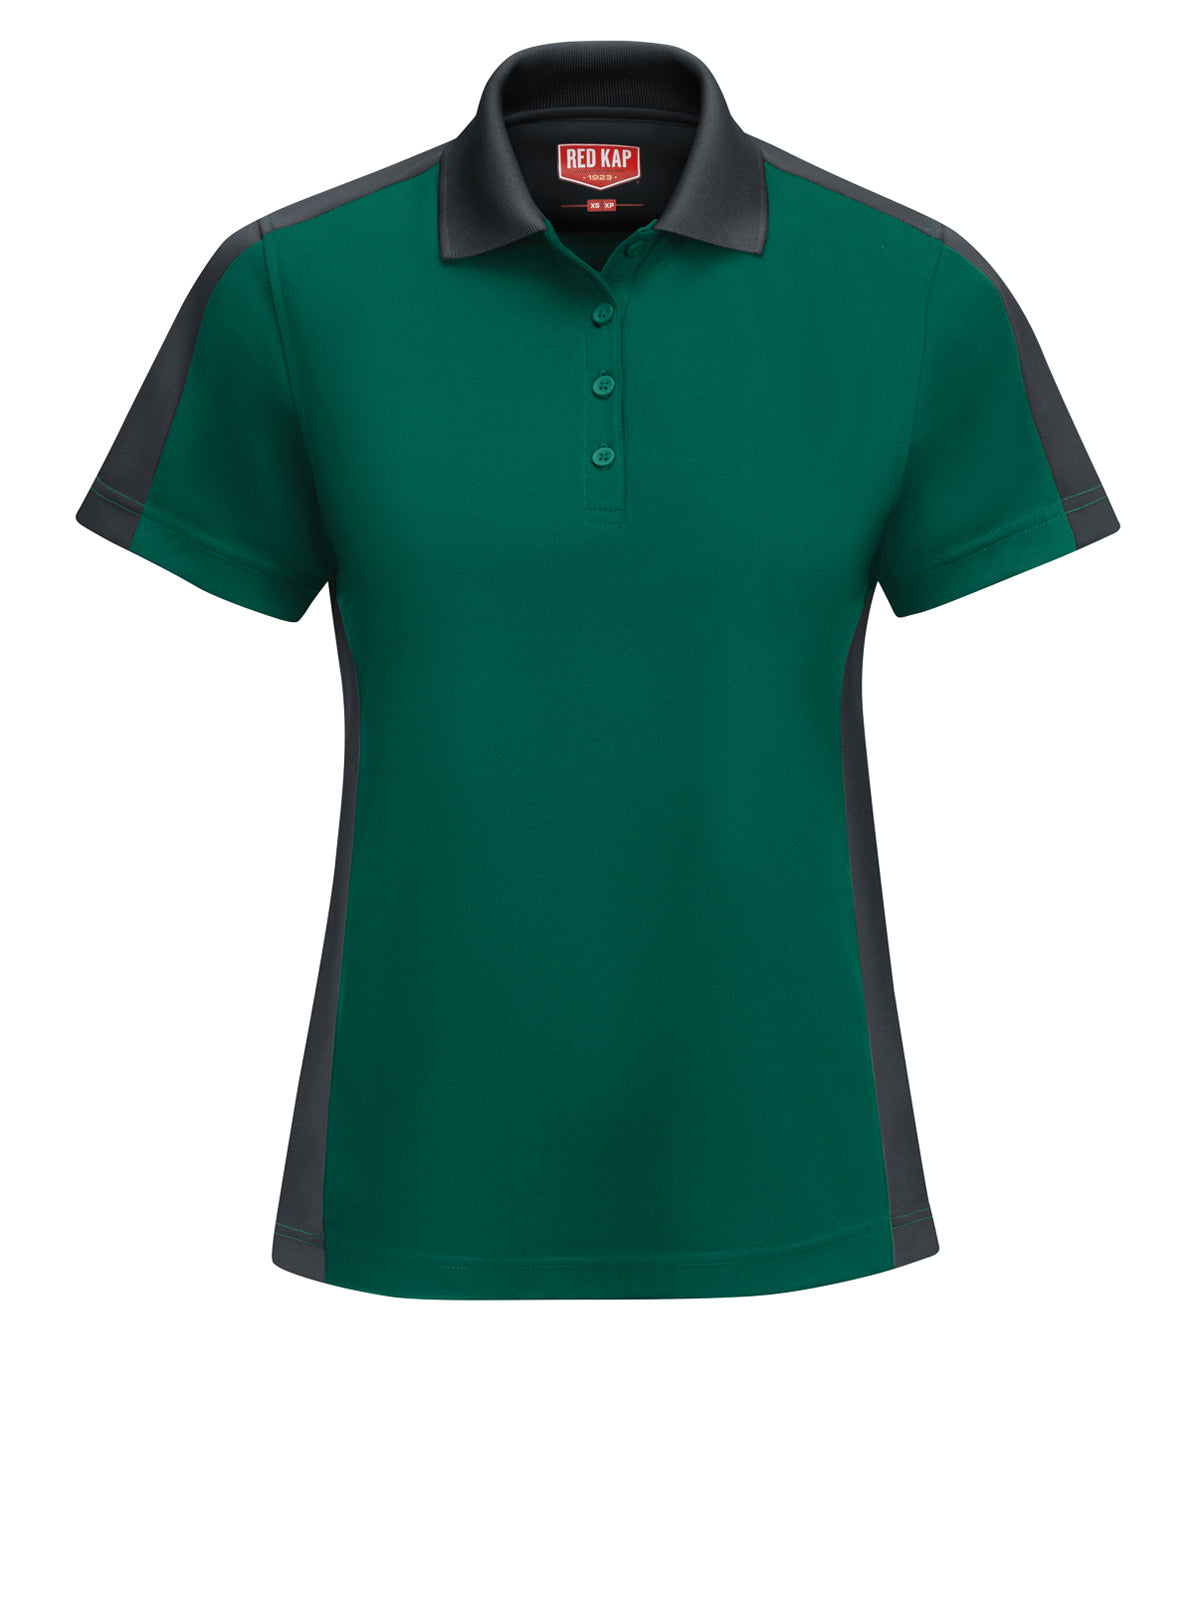 Women's Short Sleeve Performance Knit Two-Tone Polo - SK53 - Hunter Green/Charcoal